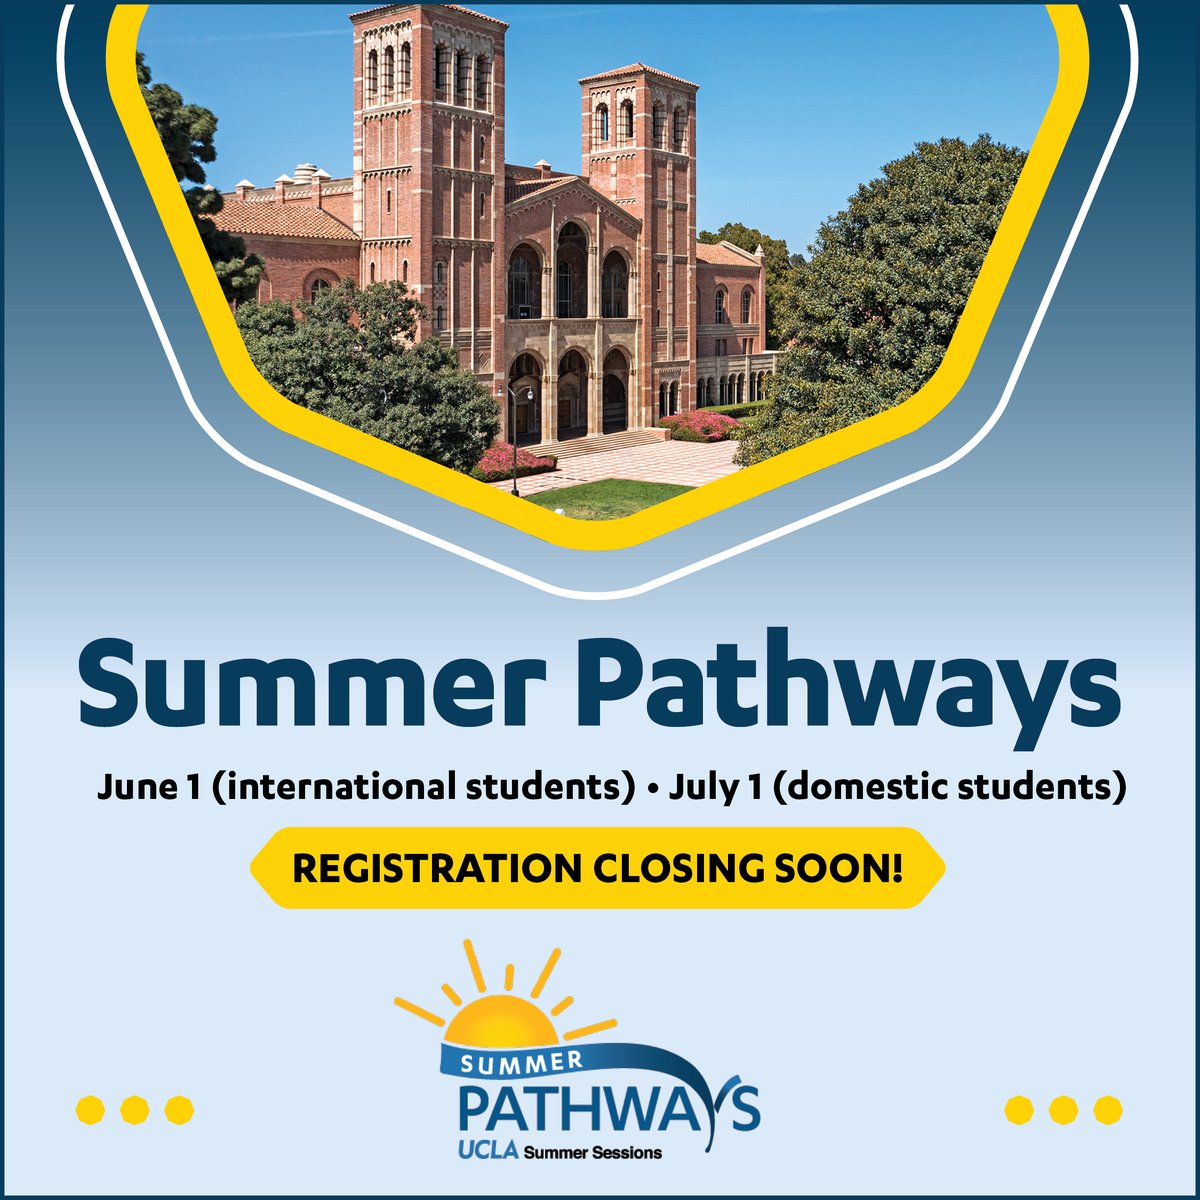 Registration is closing soon for the Summer Pathways program! Select a thoughtfully-crafted pathway, take part in engaging co-curriculars, access early college counseling and build relationships with your fellow Bruins this summer. bit.ly/uclasummerpath…